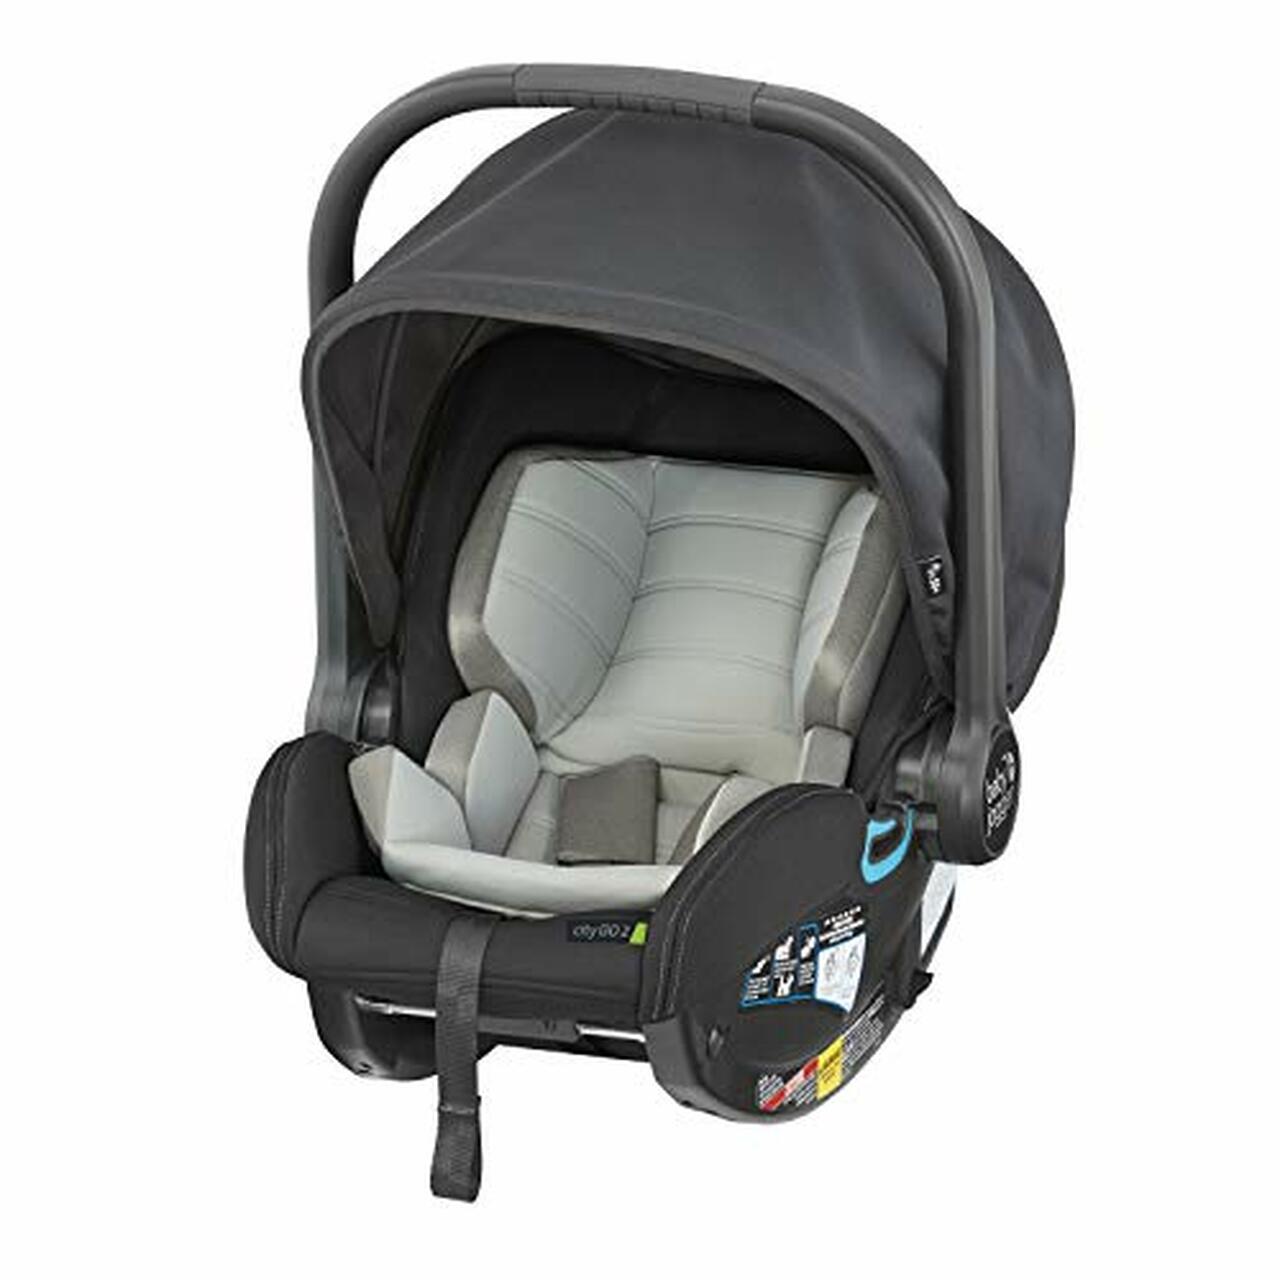 BABY JOGGER City GO Infant Car Seat - ANB Baby -$100 - $300